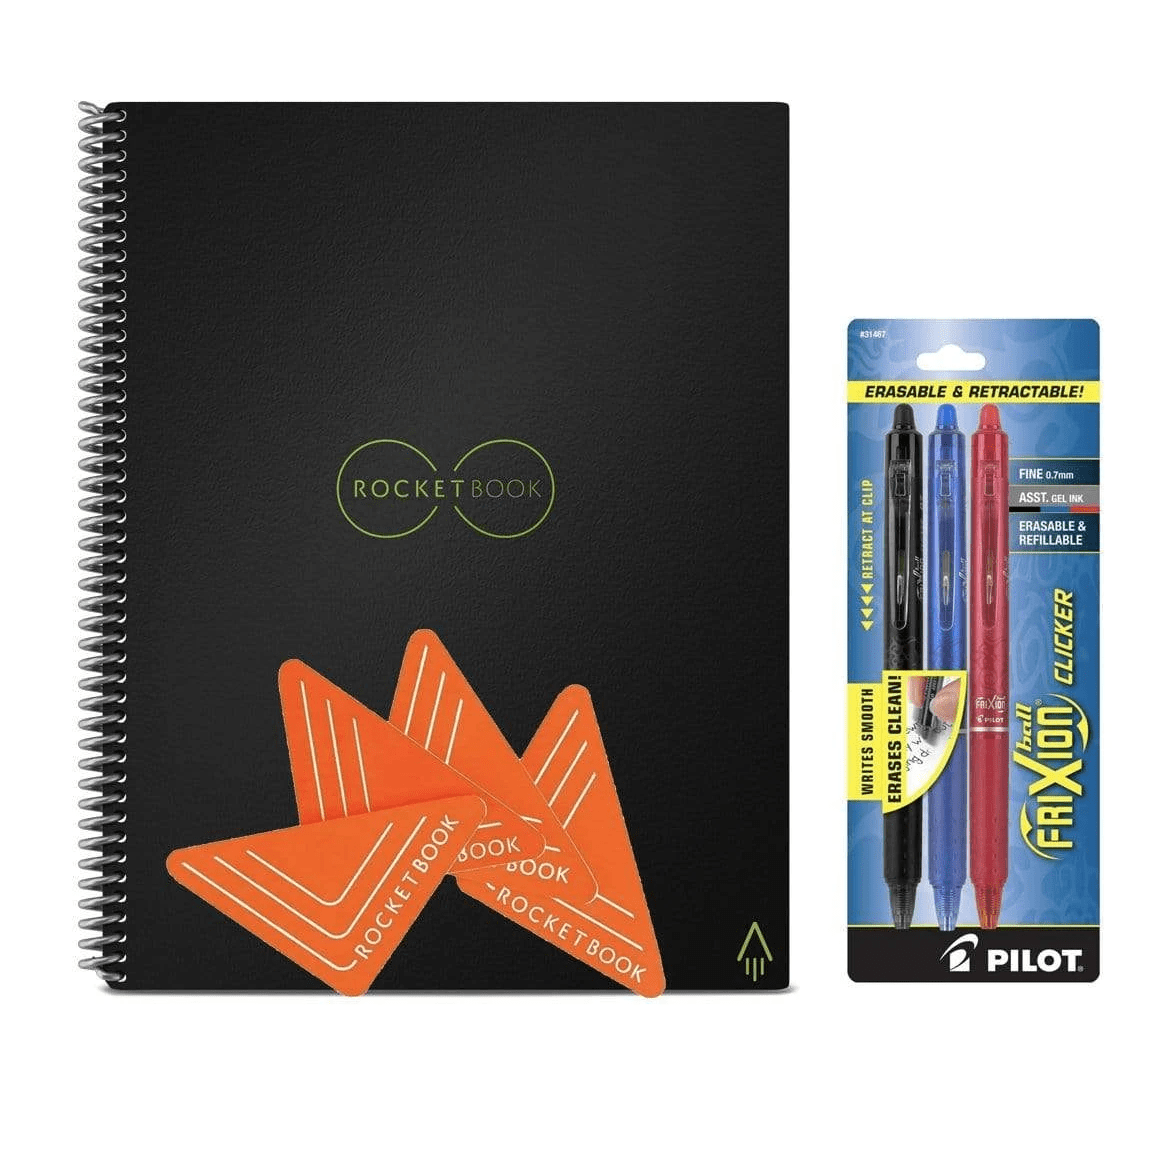 Rocketbook Review for Teachers